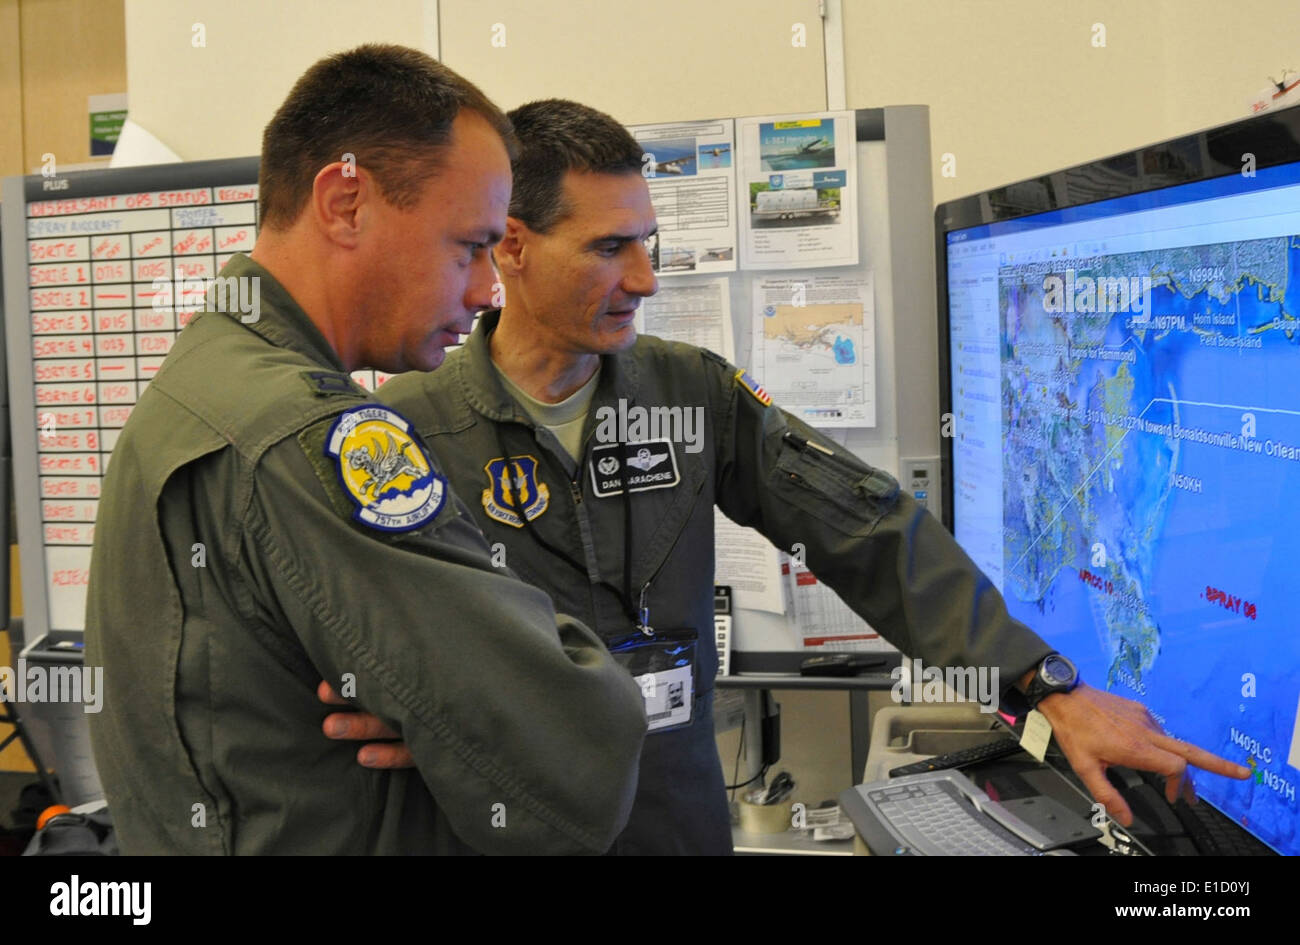 HOUMA, LA -- Air Force Reserve Lt. Col. Dan Sarachene (rear) reviews a map of the Gulf of Mexico with Capt. Travis Adams at the Stock Photo